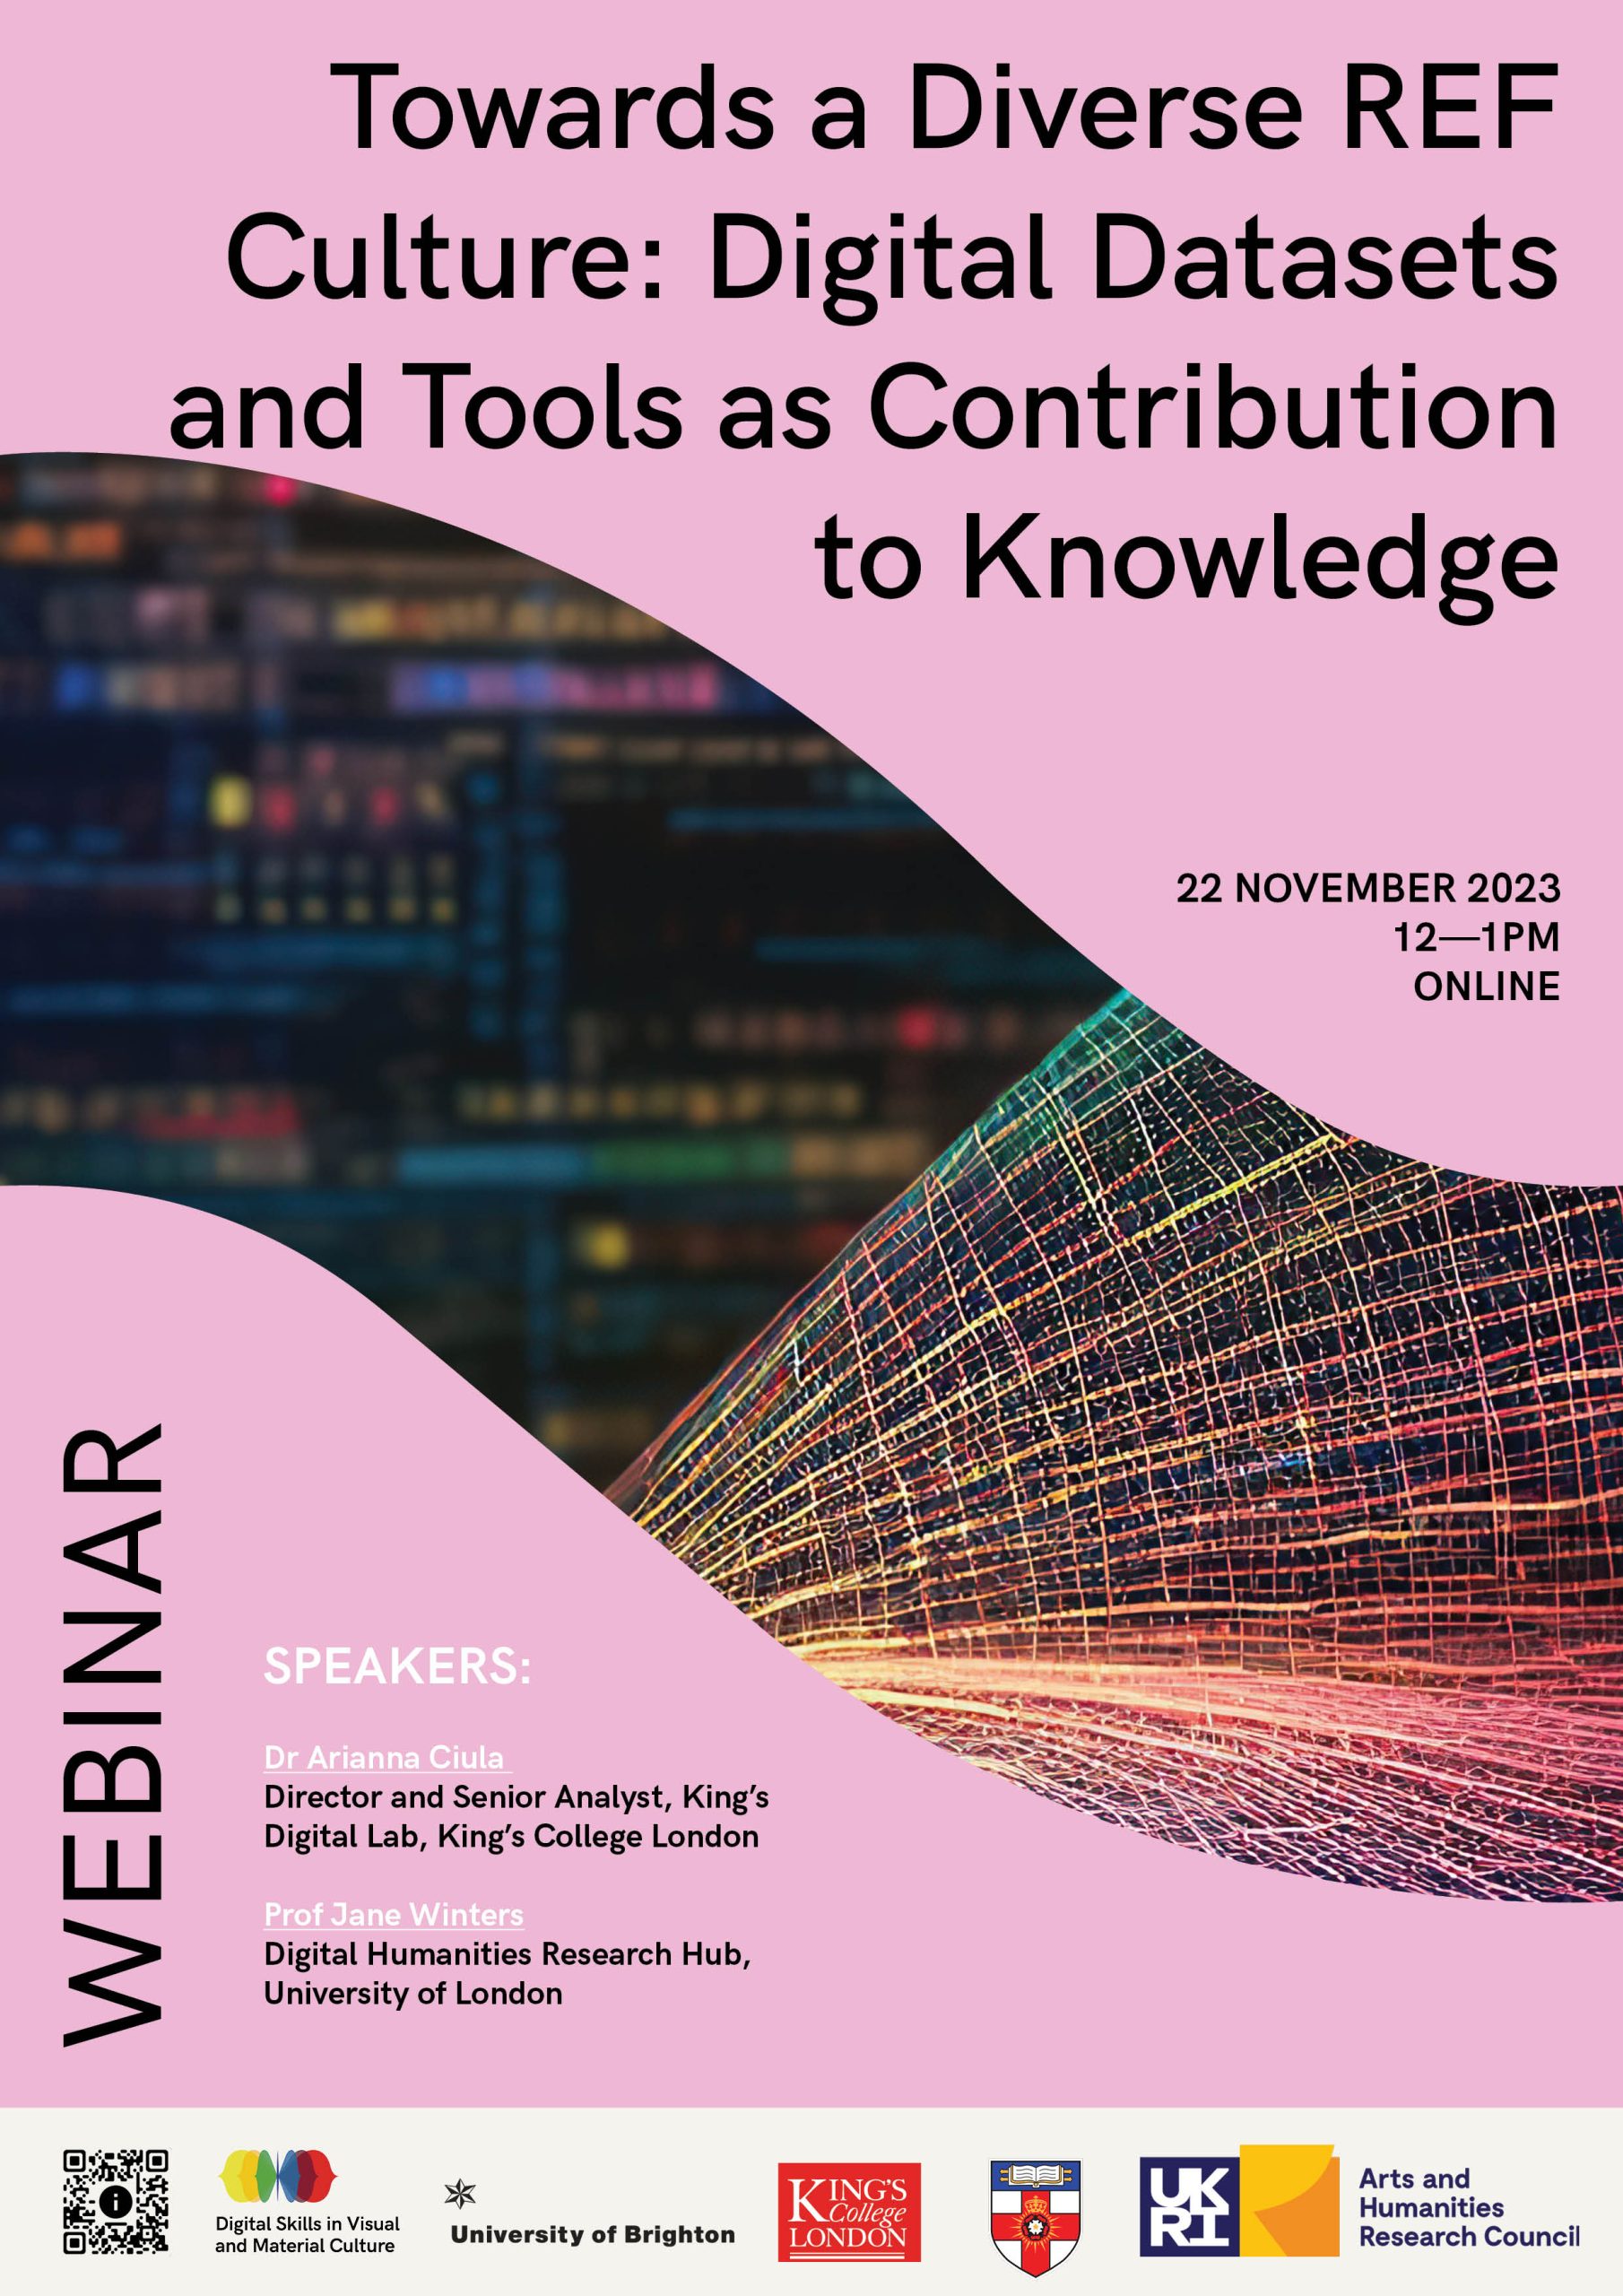 Webinar: Towards a Diverse REF Culture: Digital Datasets and Tools as Contribution to Knowledge | November 22, 12:00-1:00pm